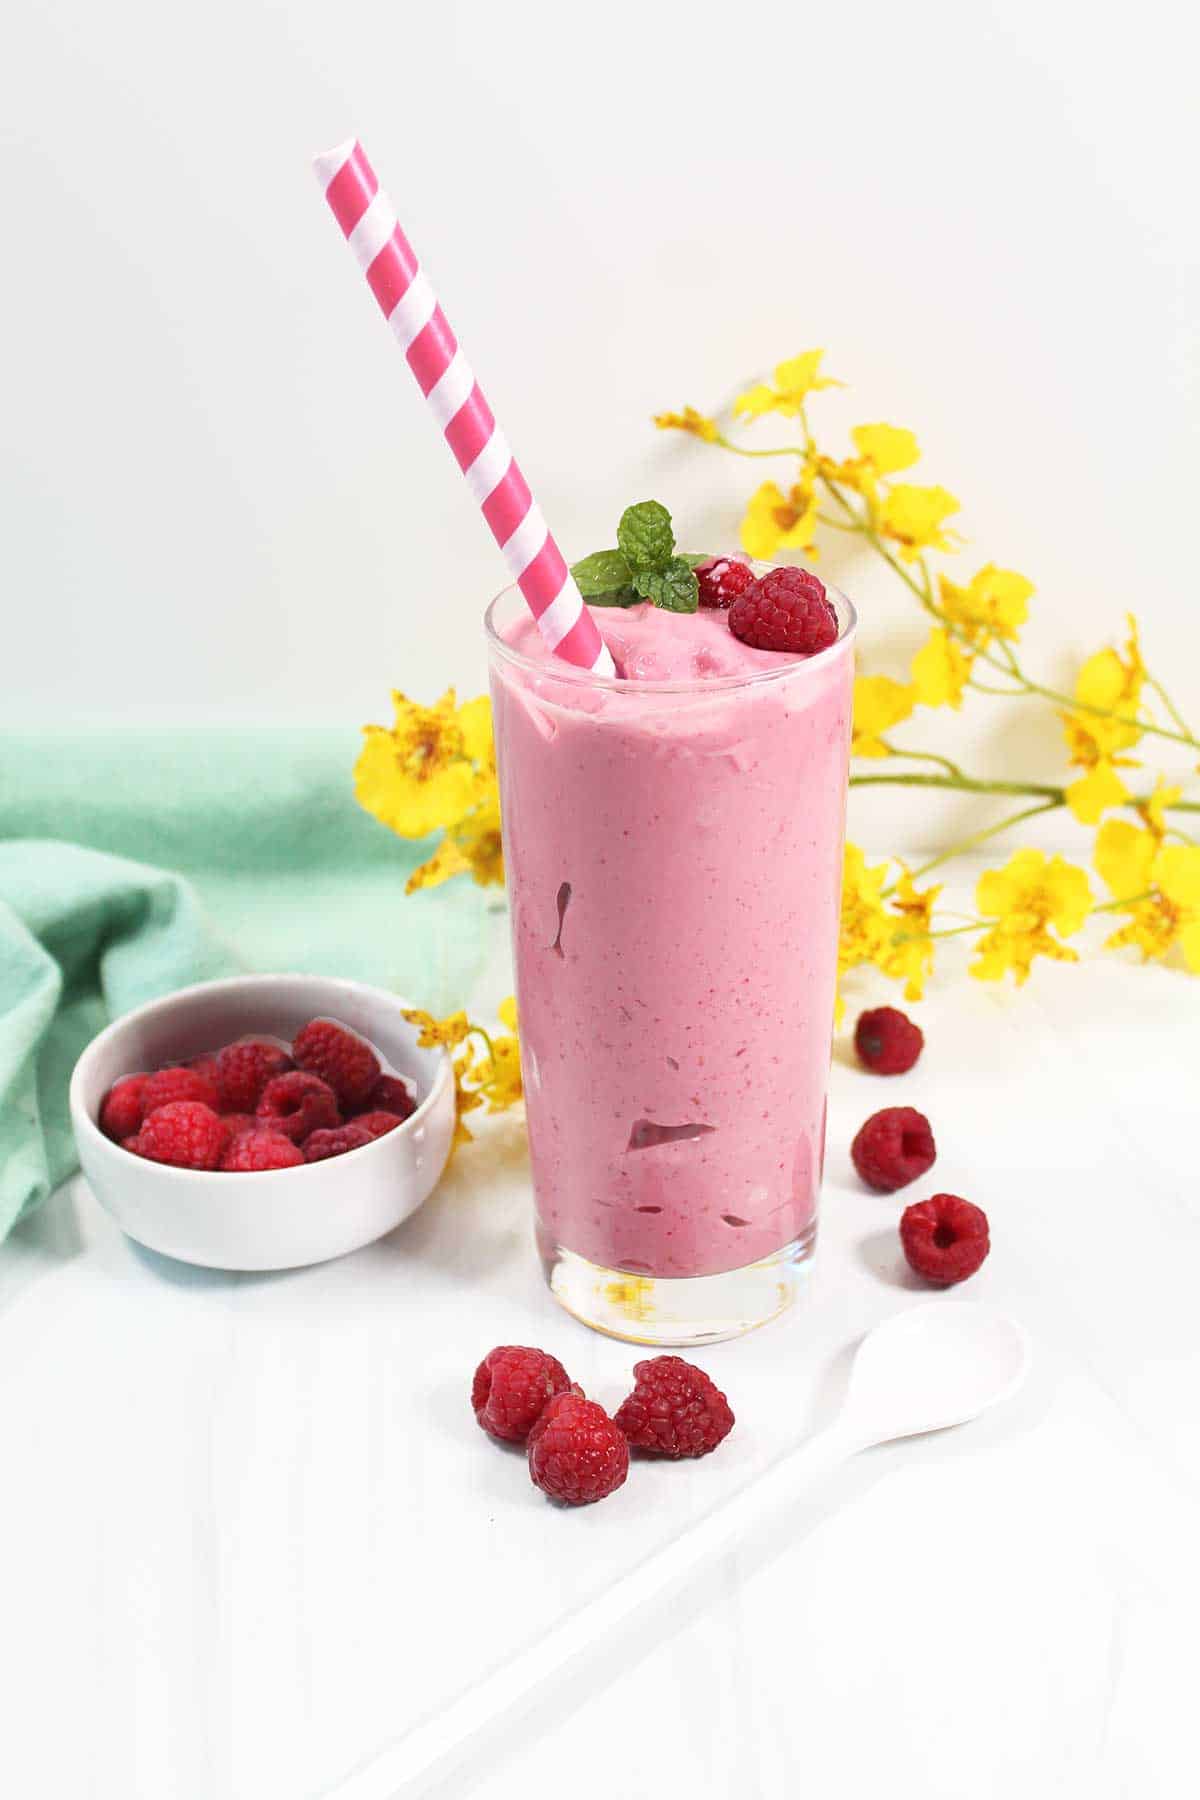 Smoothie in glass with pink striped straw.